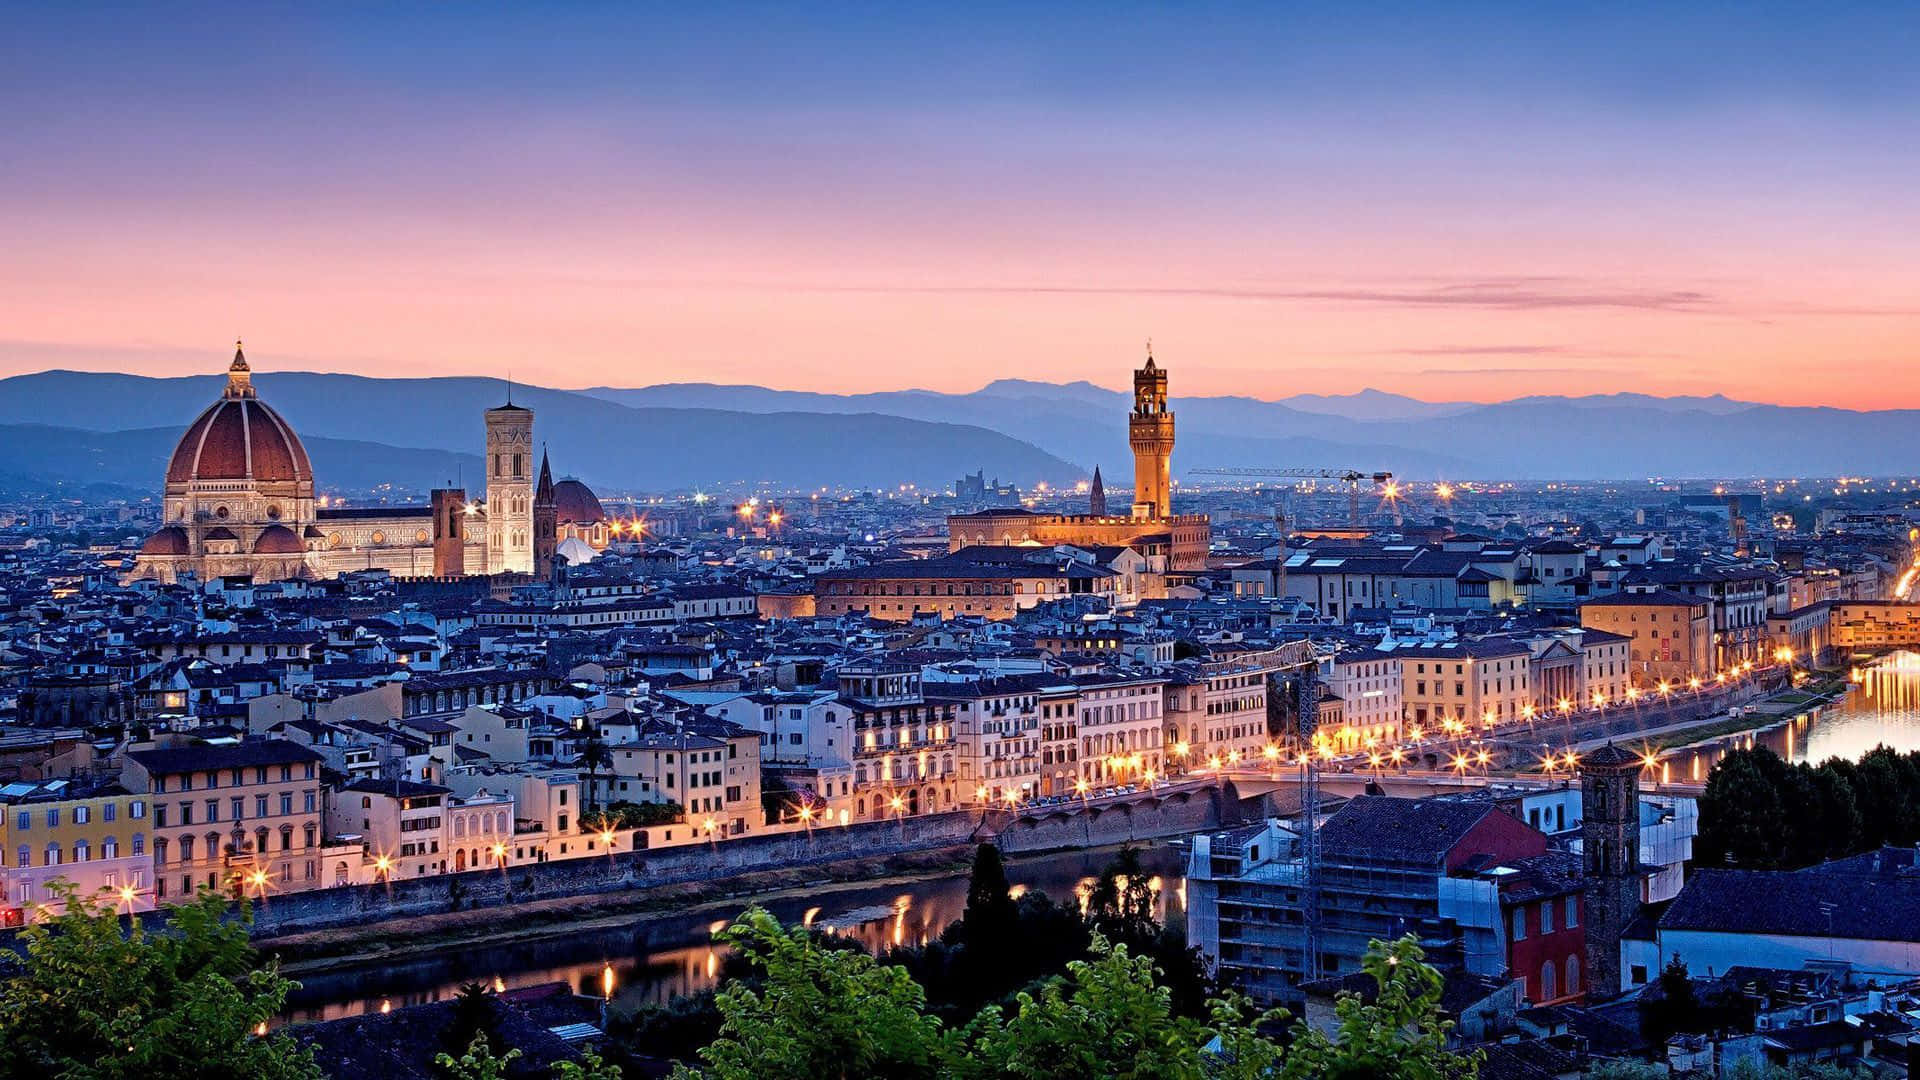 Florence At Dusk With The River And Buildings